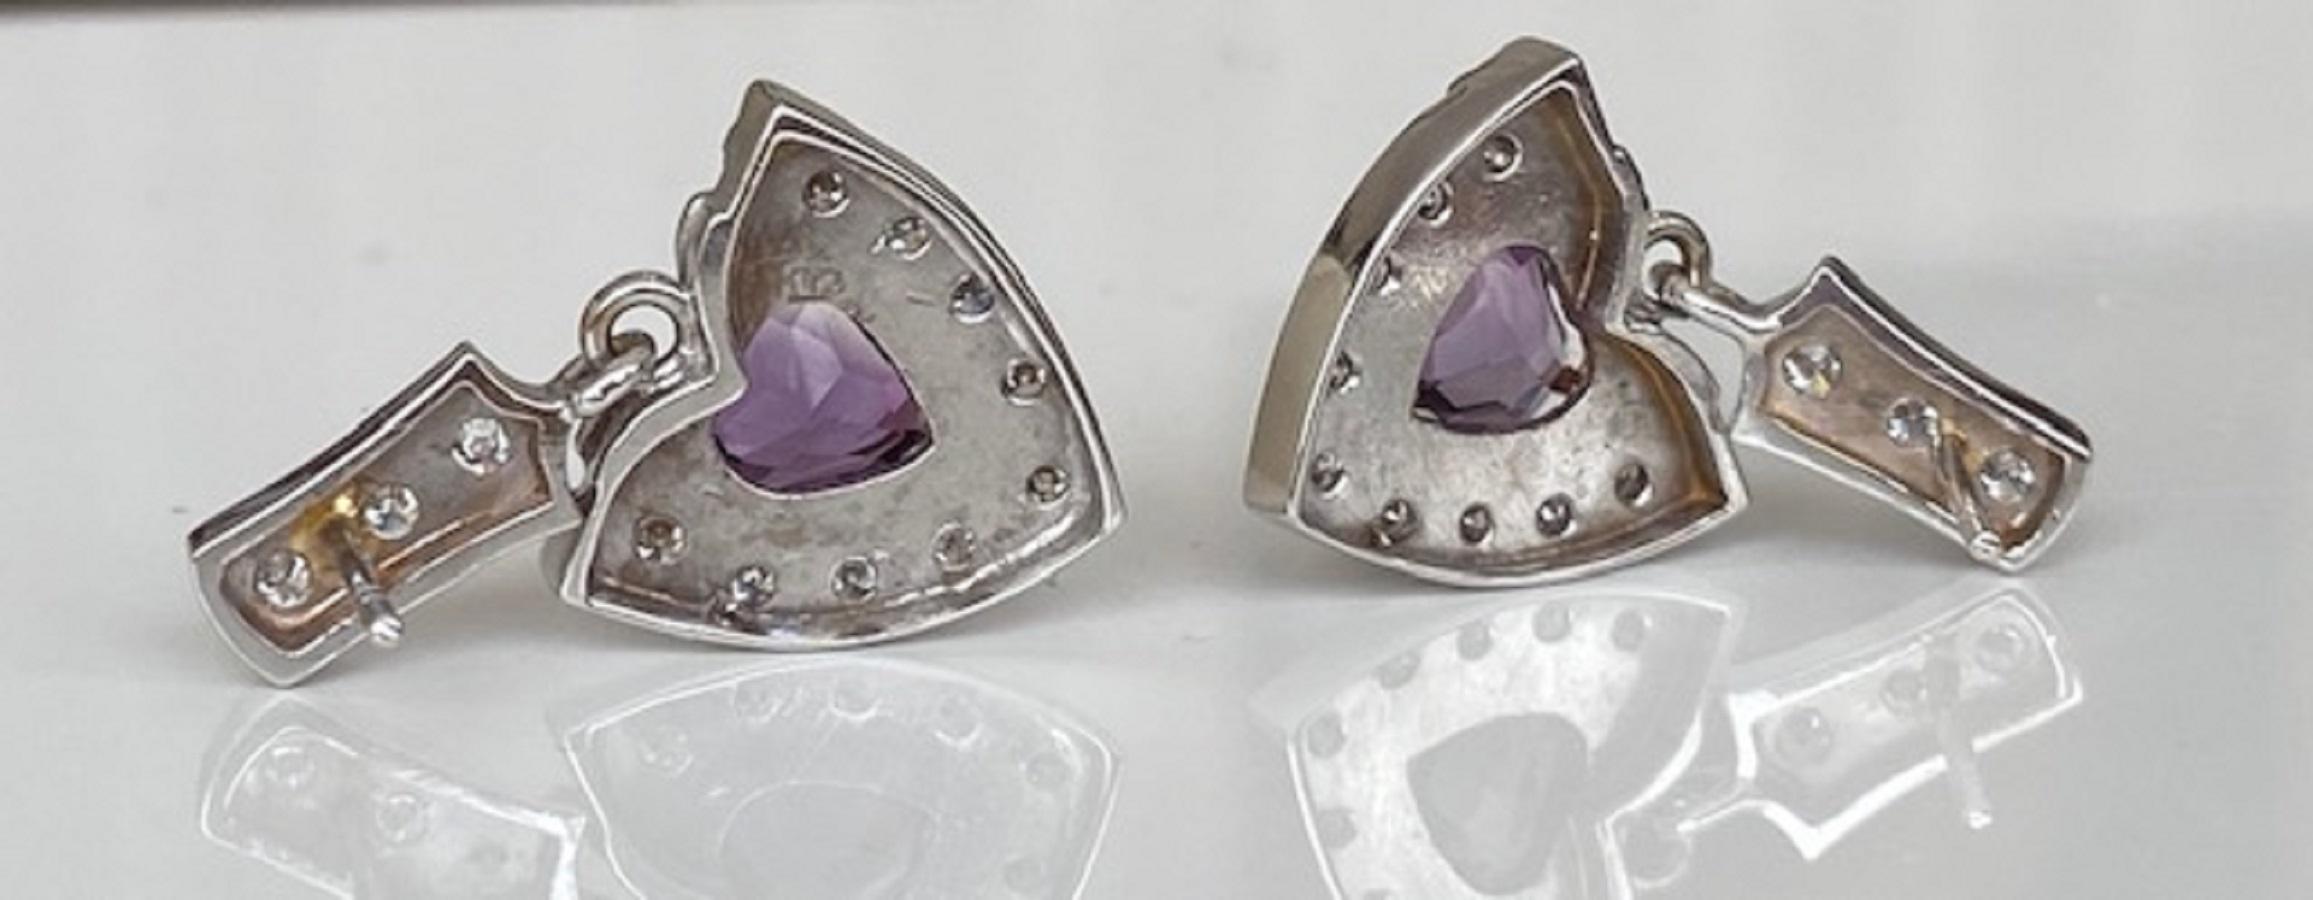 Vintage 18 kt white gold Diamond Dangle earrings studs with Amethyst For Sale 5